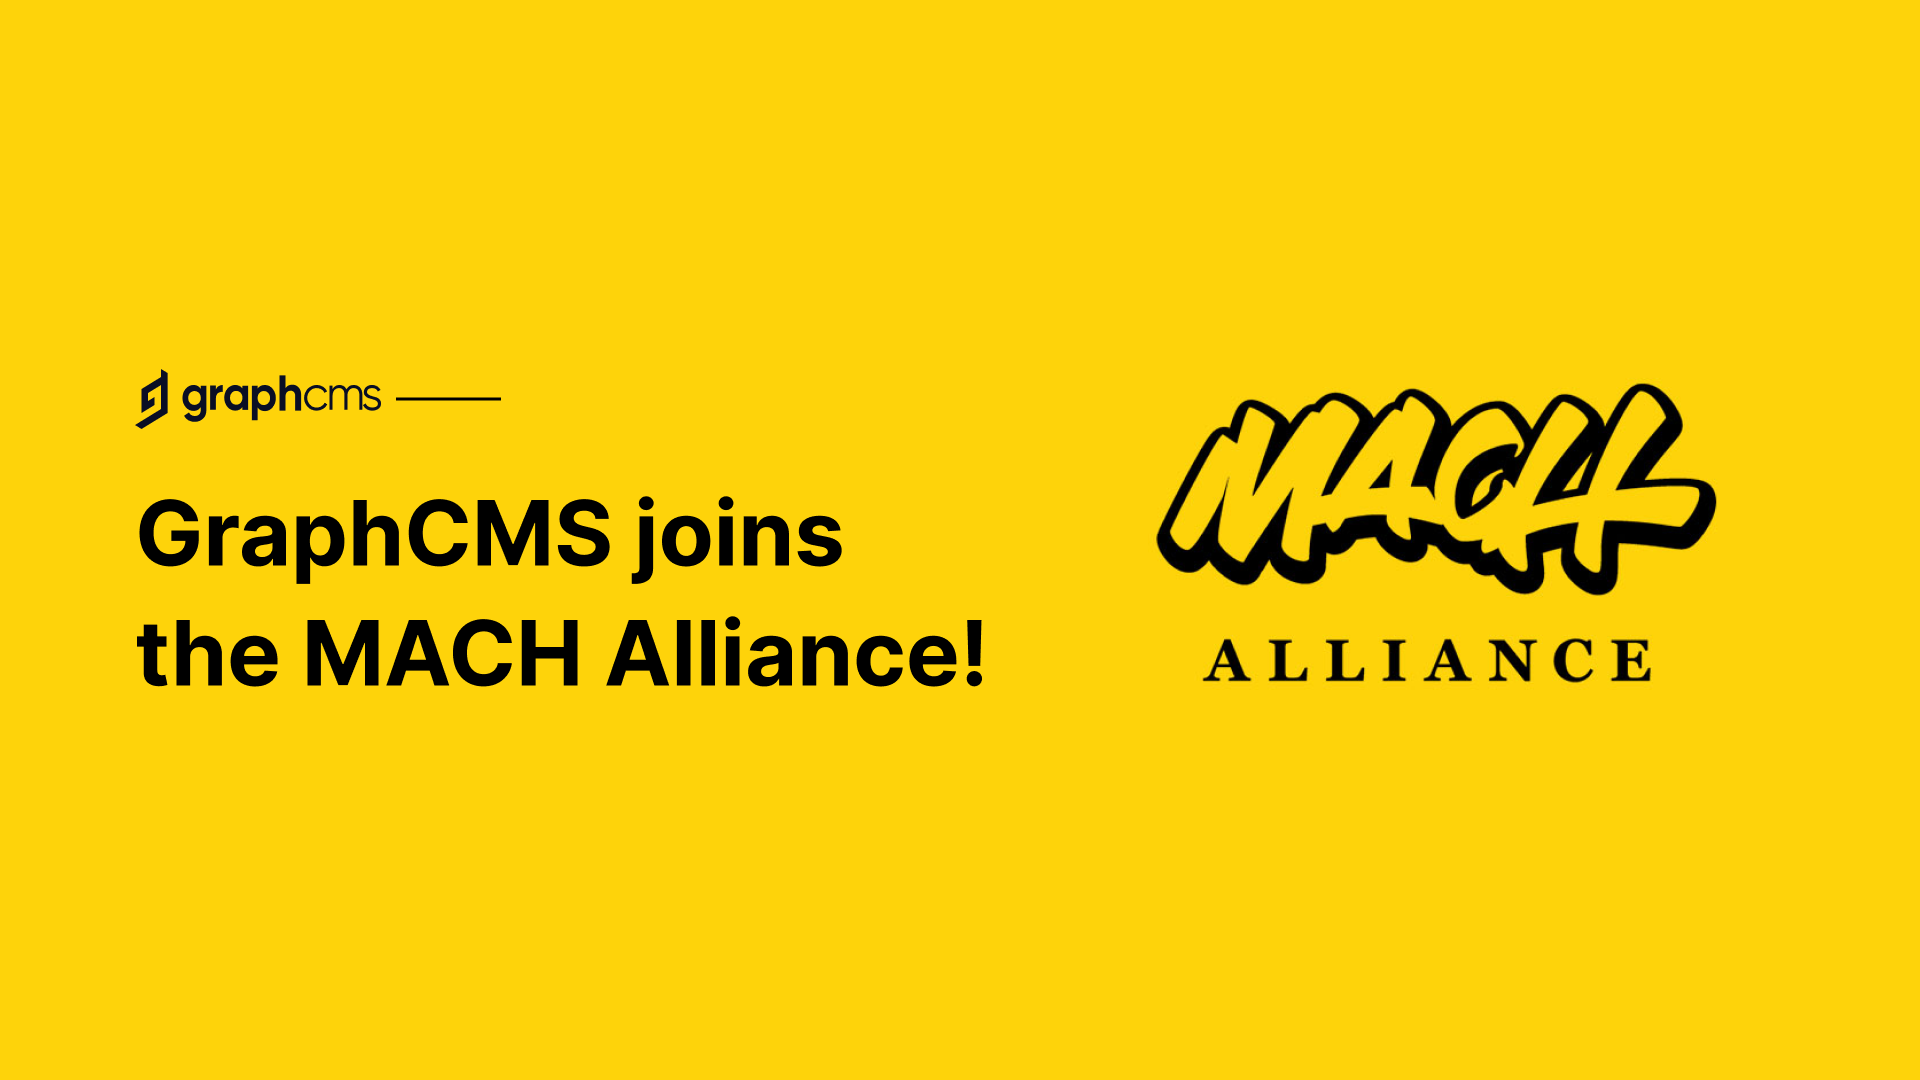 GraphCMS Joins the MACH Alliance to Federate the Content Layer